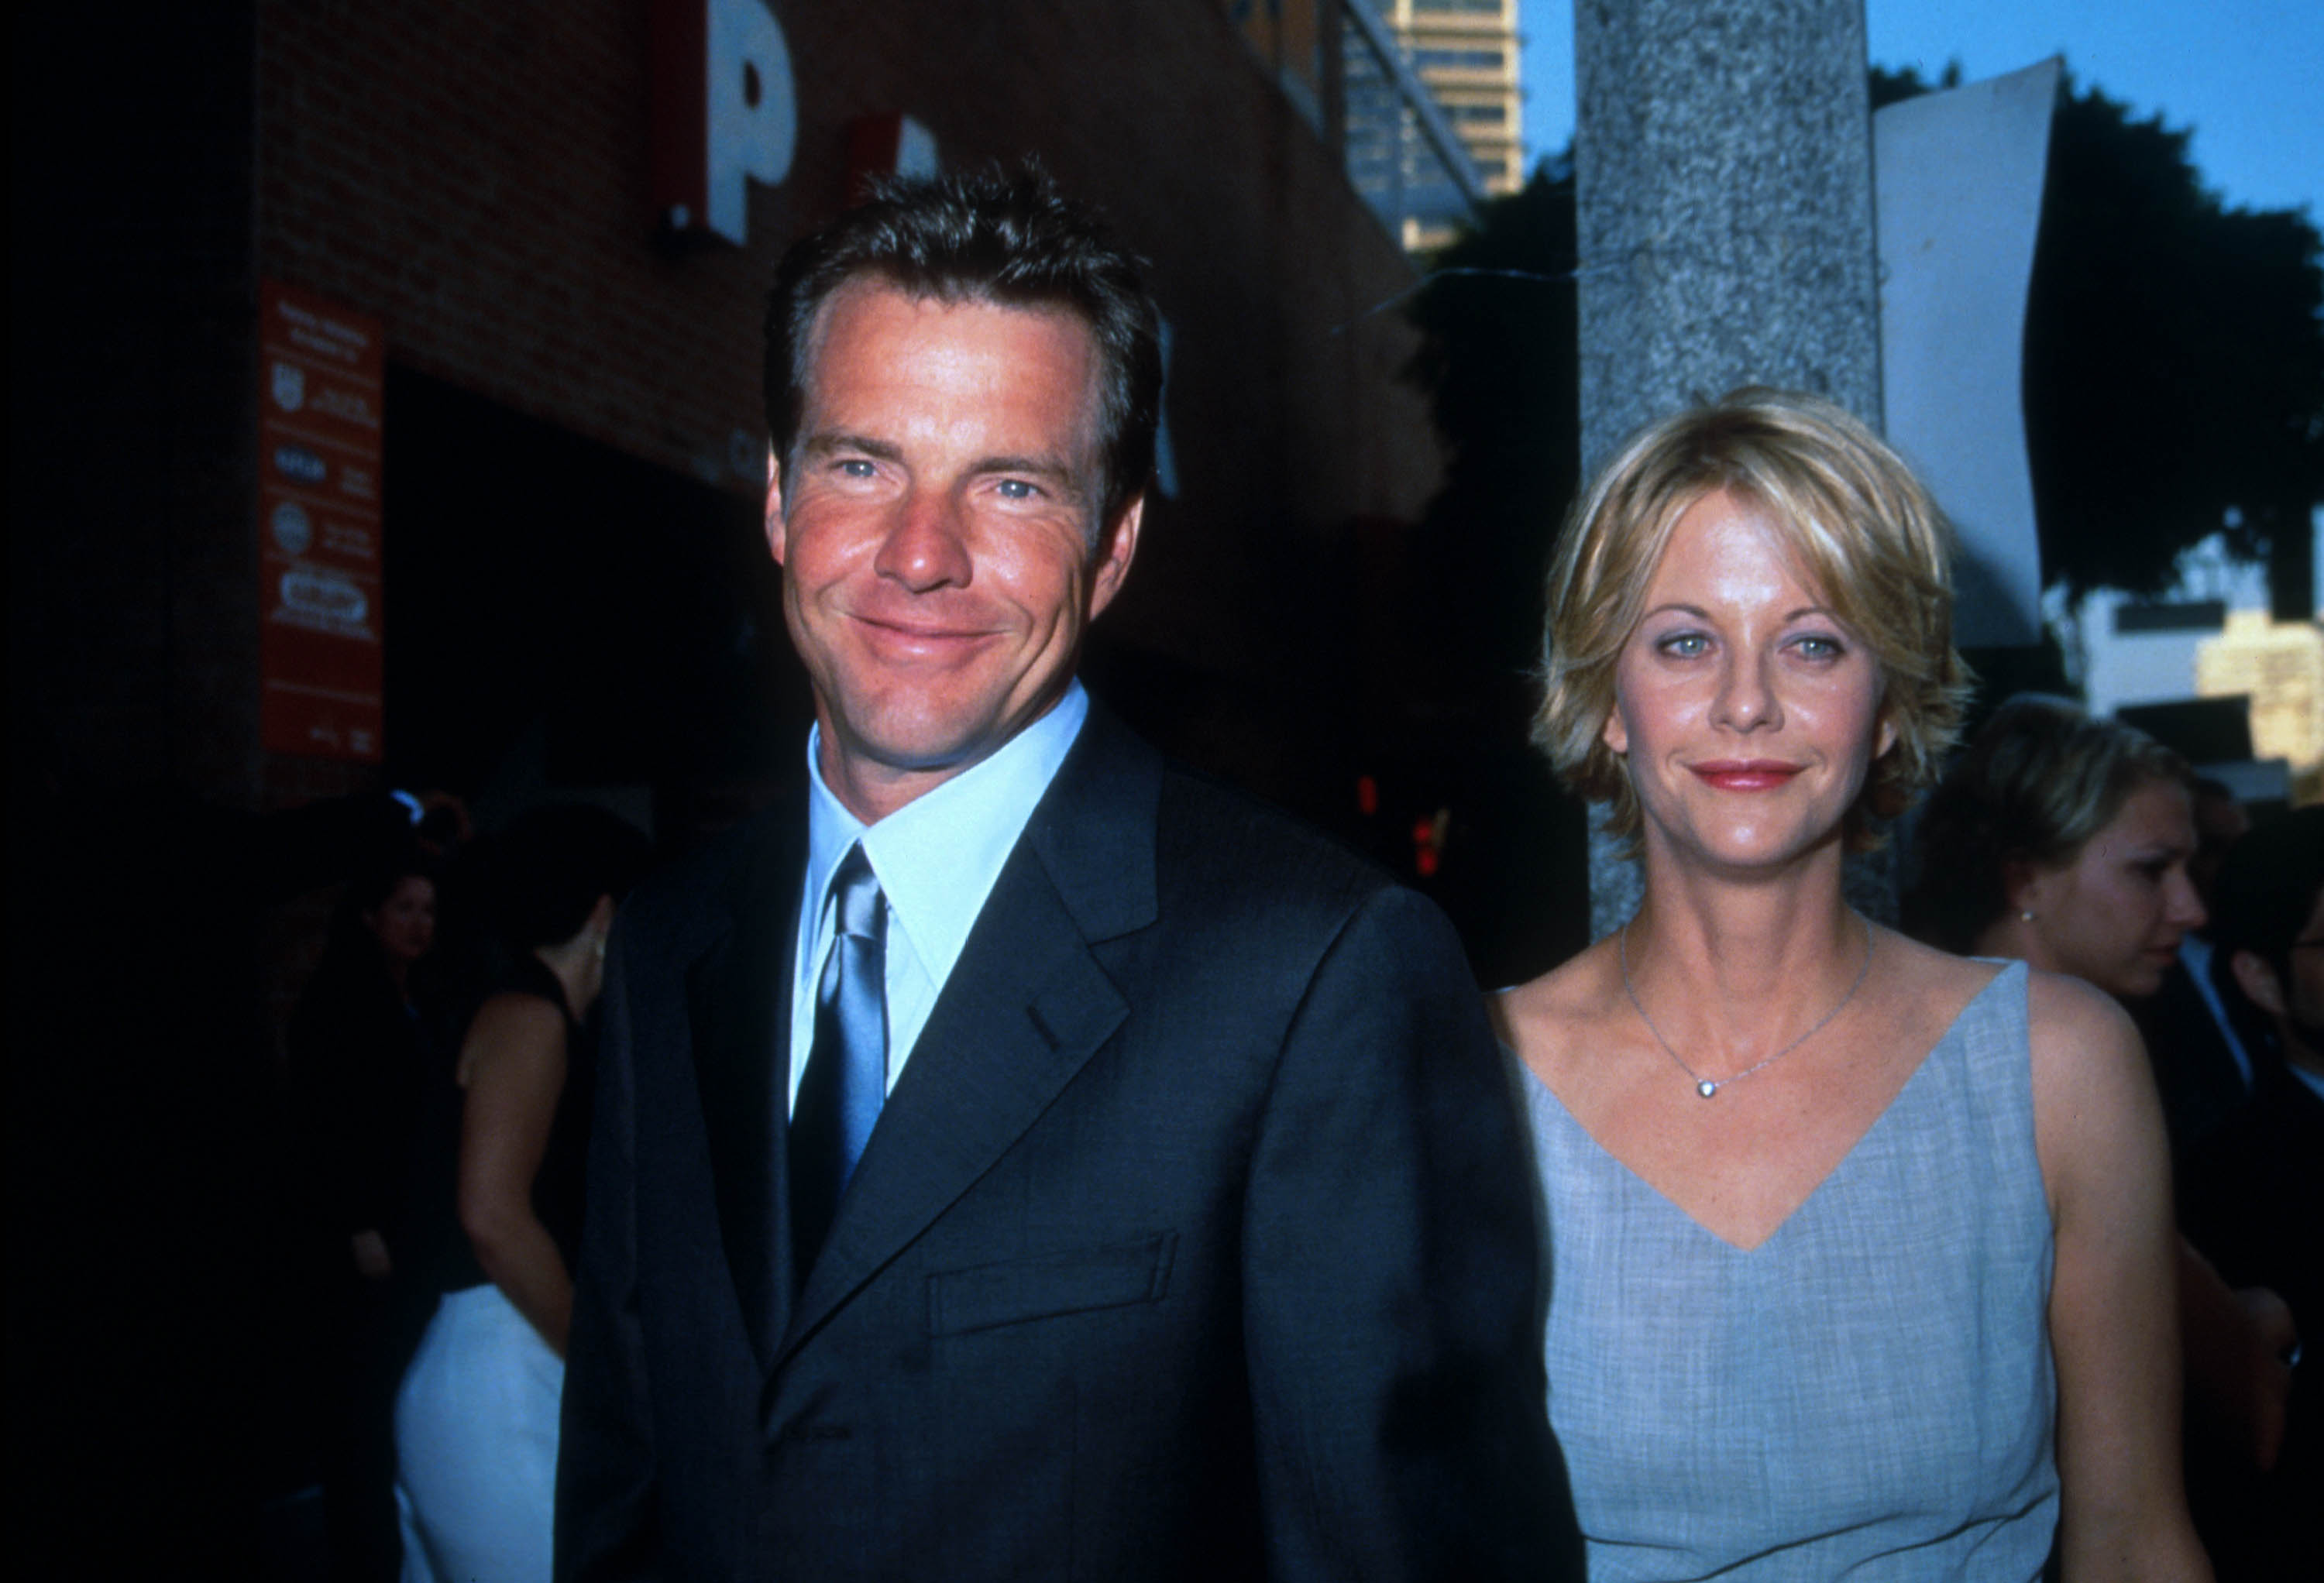 Dennis Quaid and Meg Ryan at "The Parent Trap" premiere on July 20, 1998 | Source: Getty Images